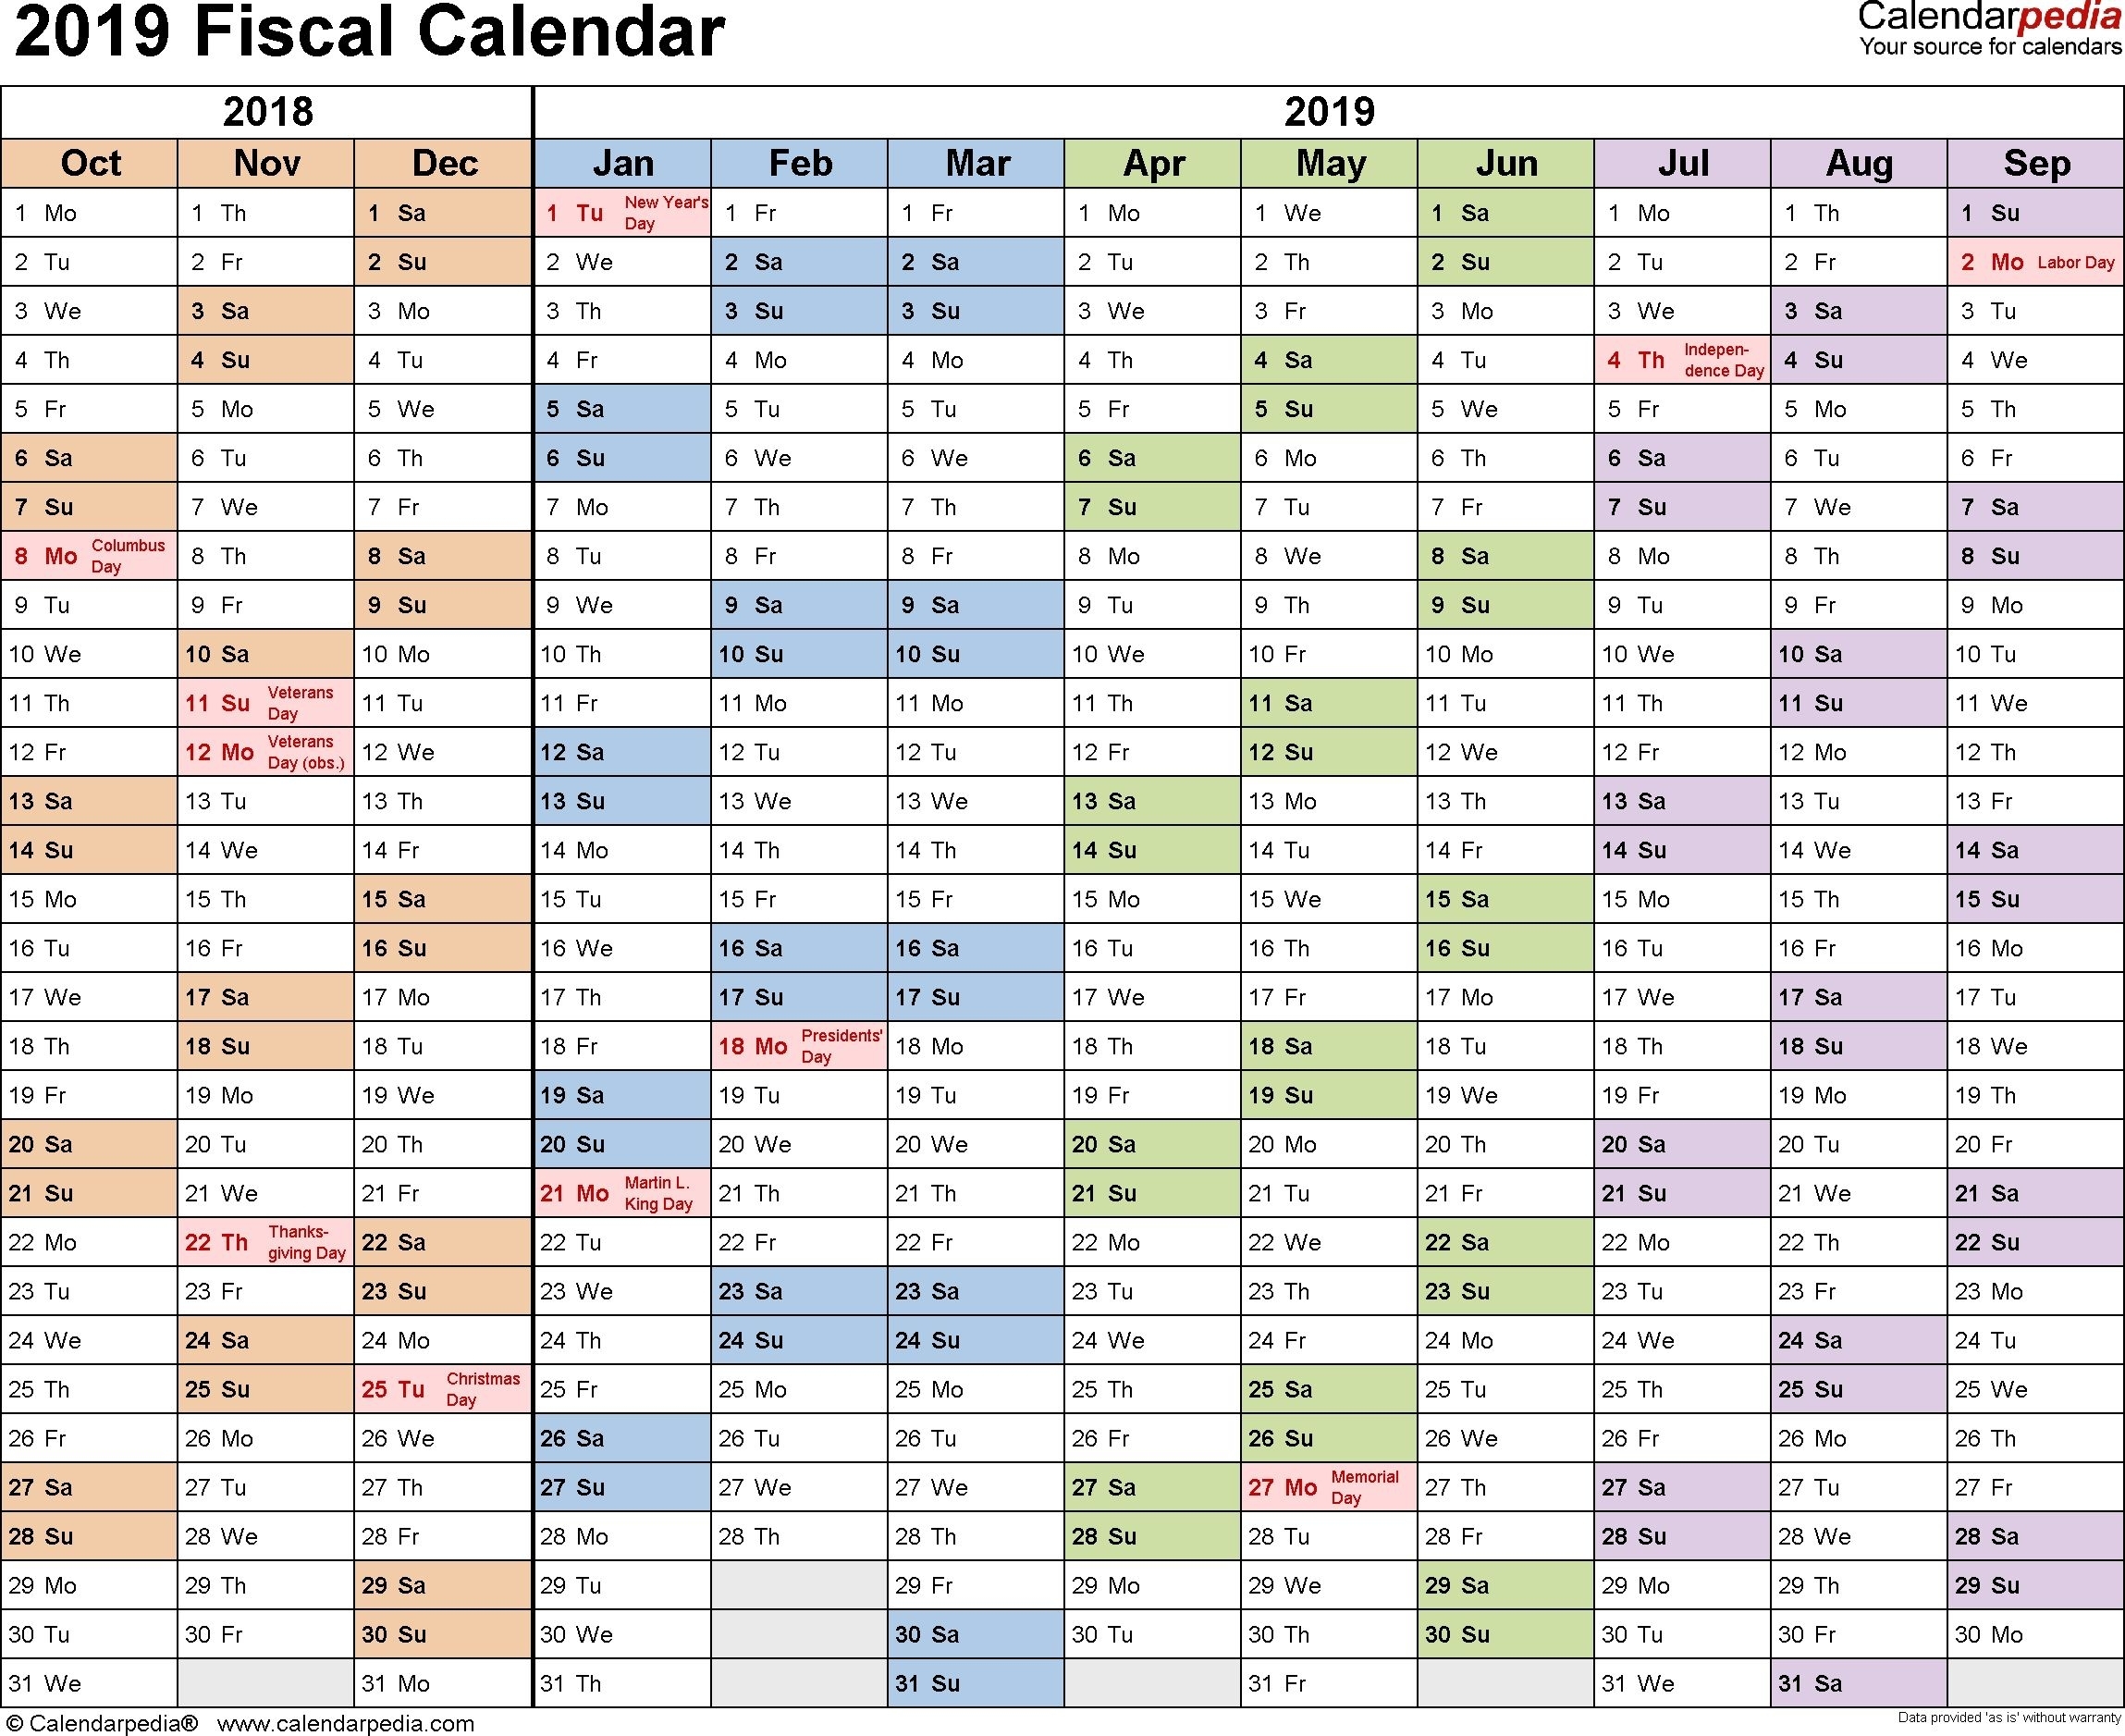 Pin On Calendar Printable Ideas intended for Financial Calendar 2019-2020 In Weeks